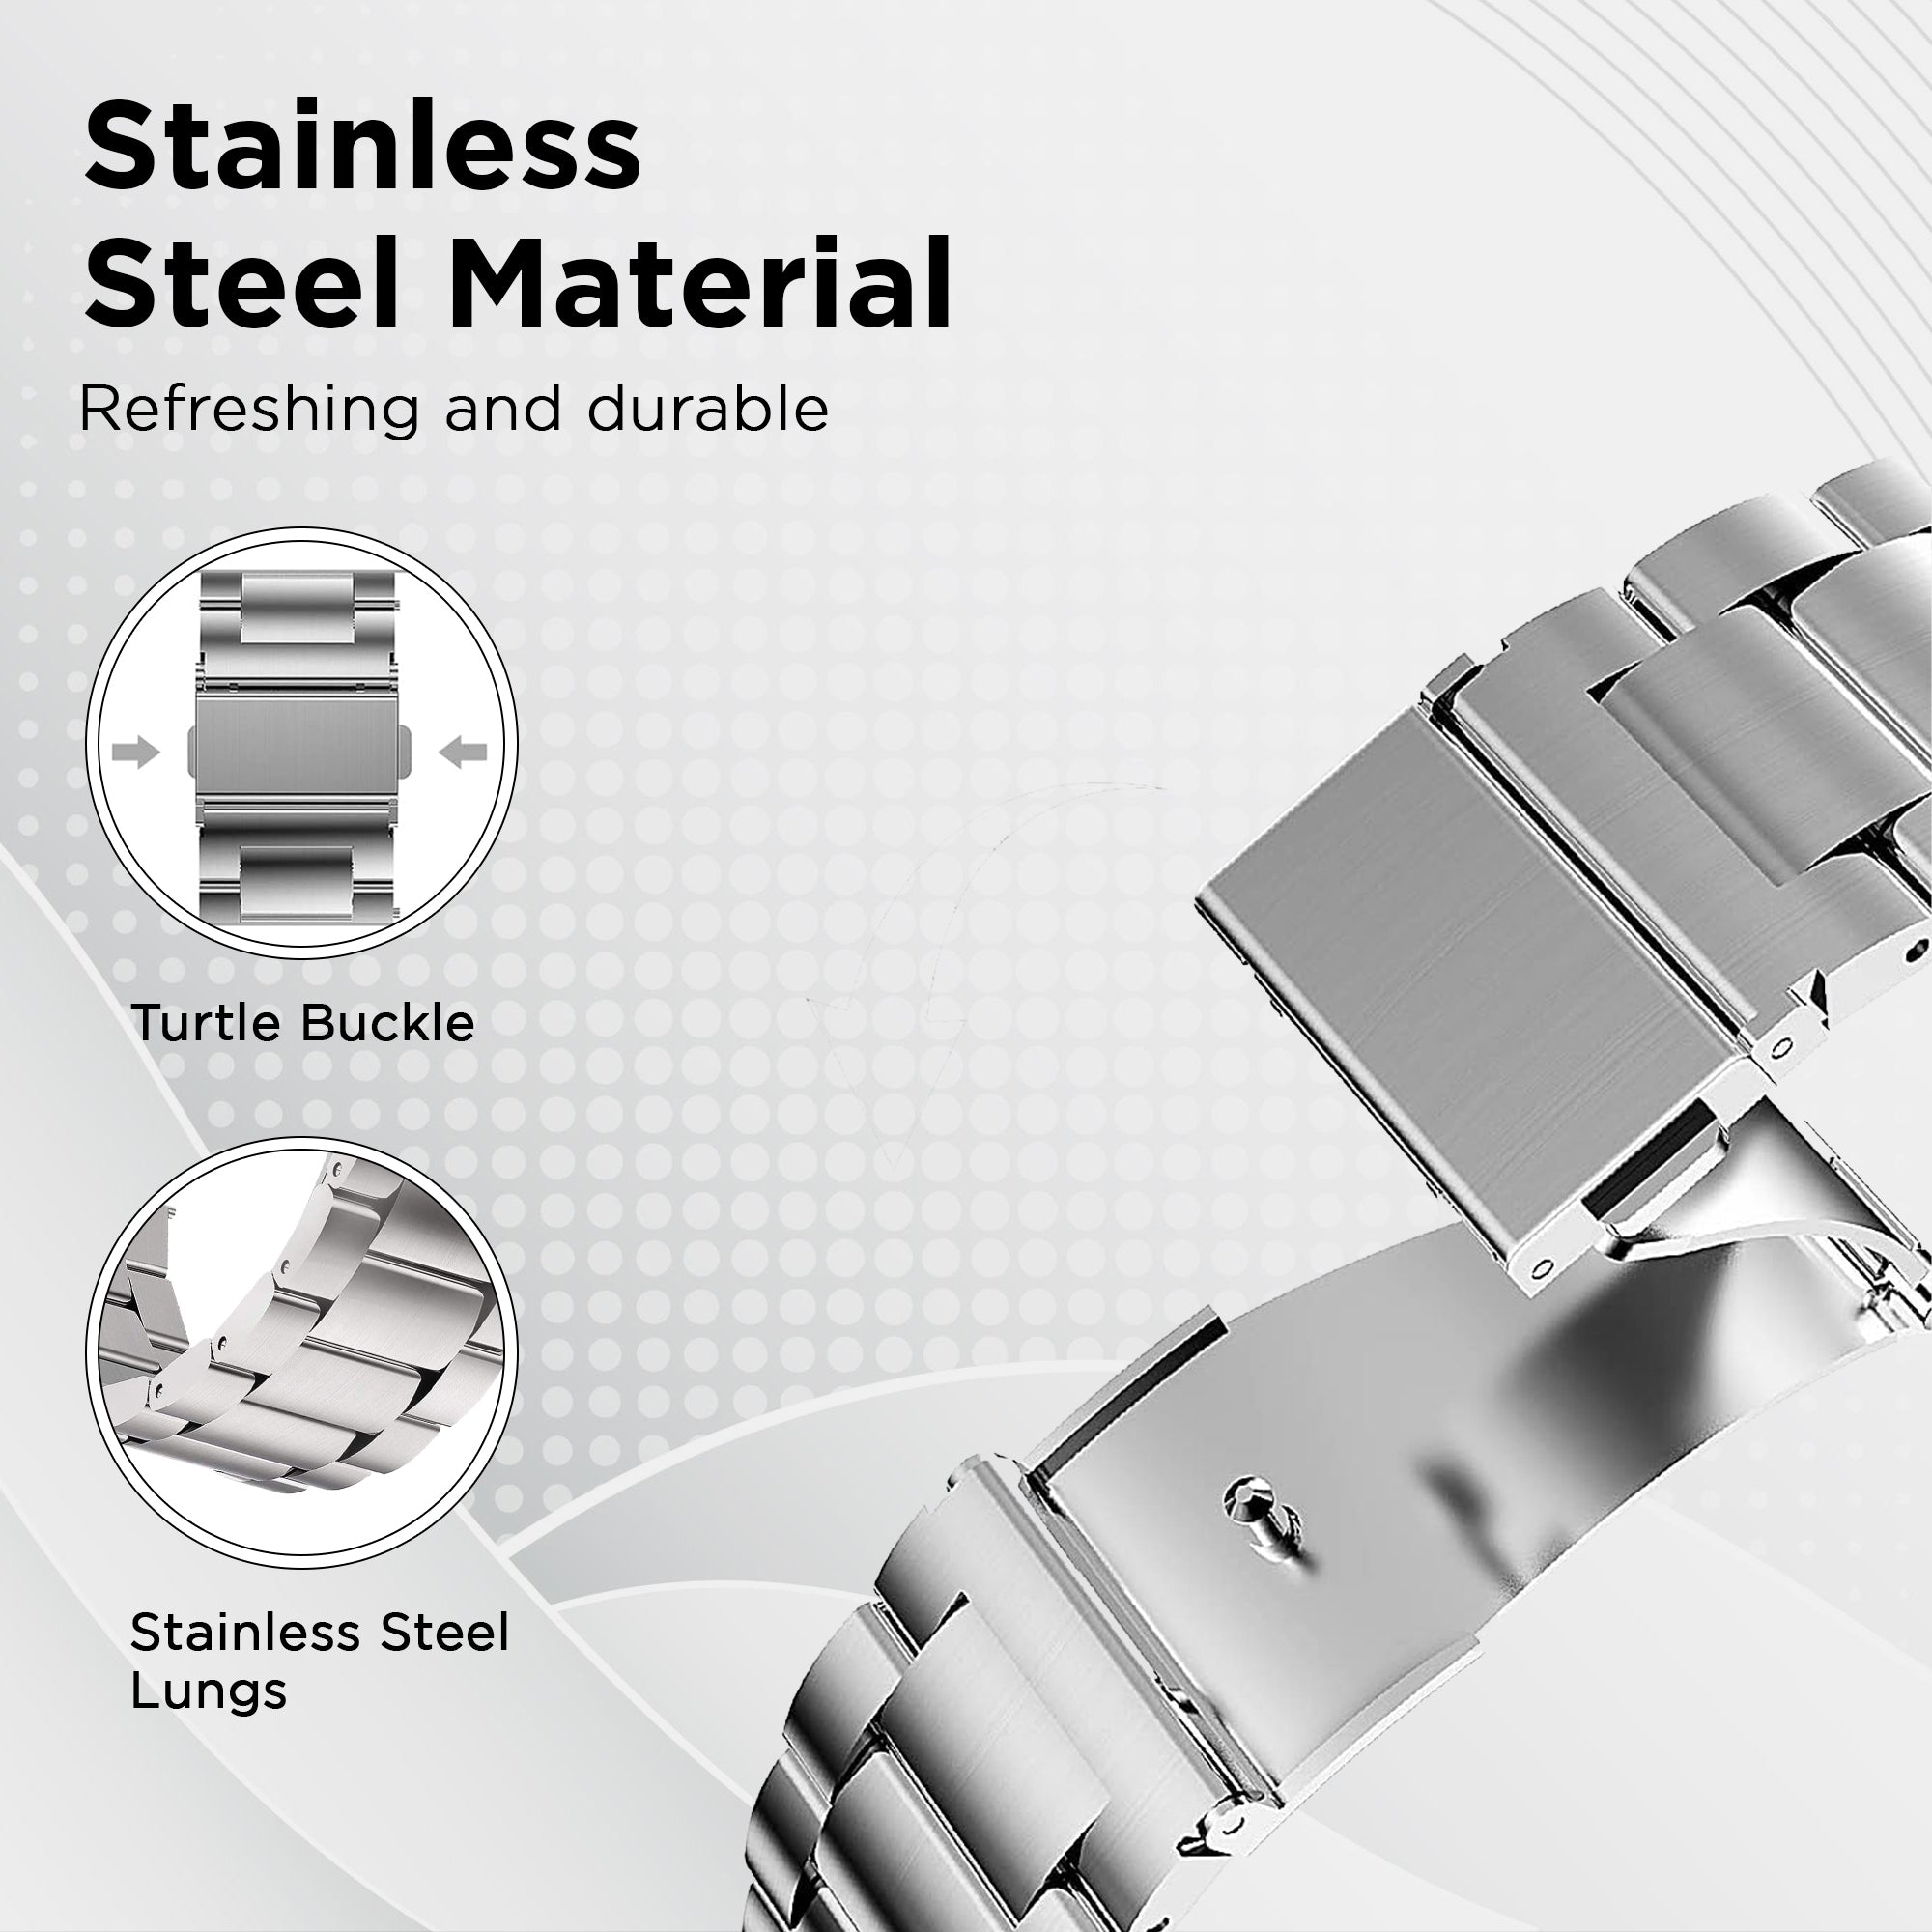 GIZMORE 22MM Stainless Steel Material Refreshing & Durable Strap Compatible with Multiple Watches | Stainless Steel Lungs | Turtle Buckle | Quick Release Pin for Your Wrist (Steel Strap)